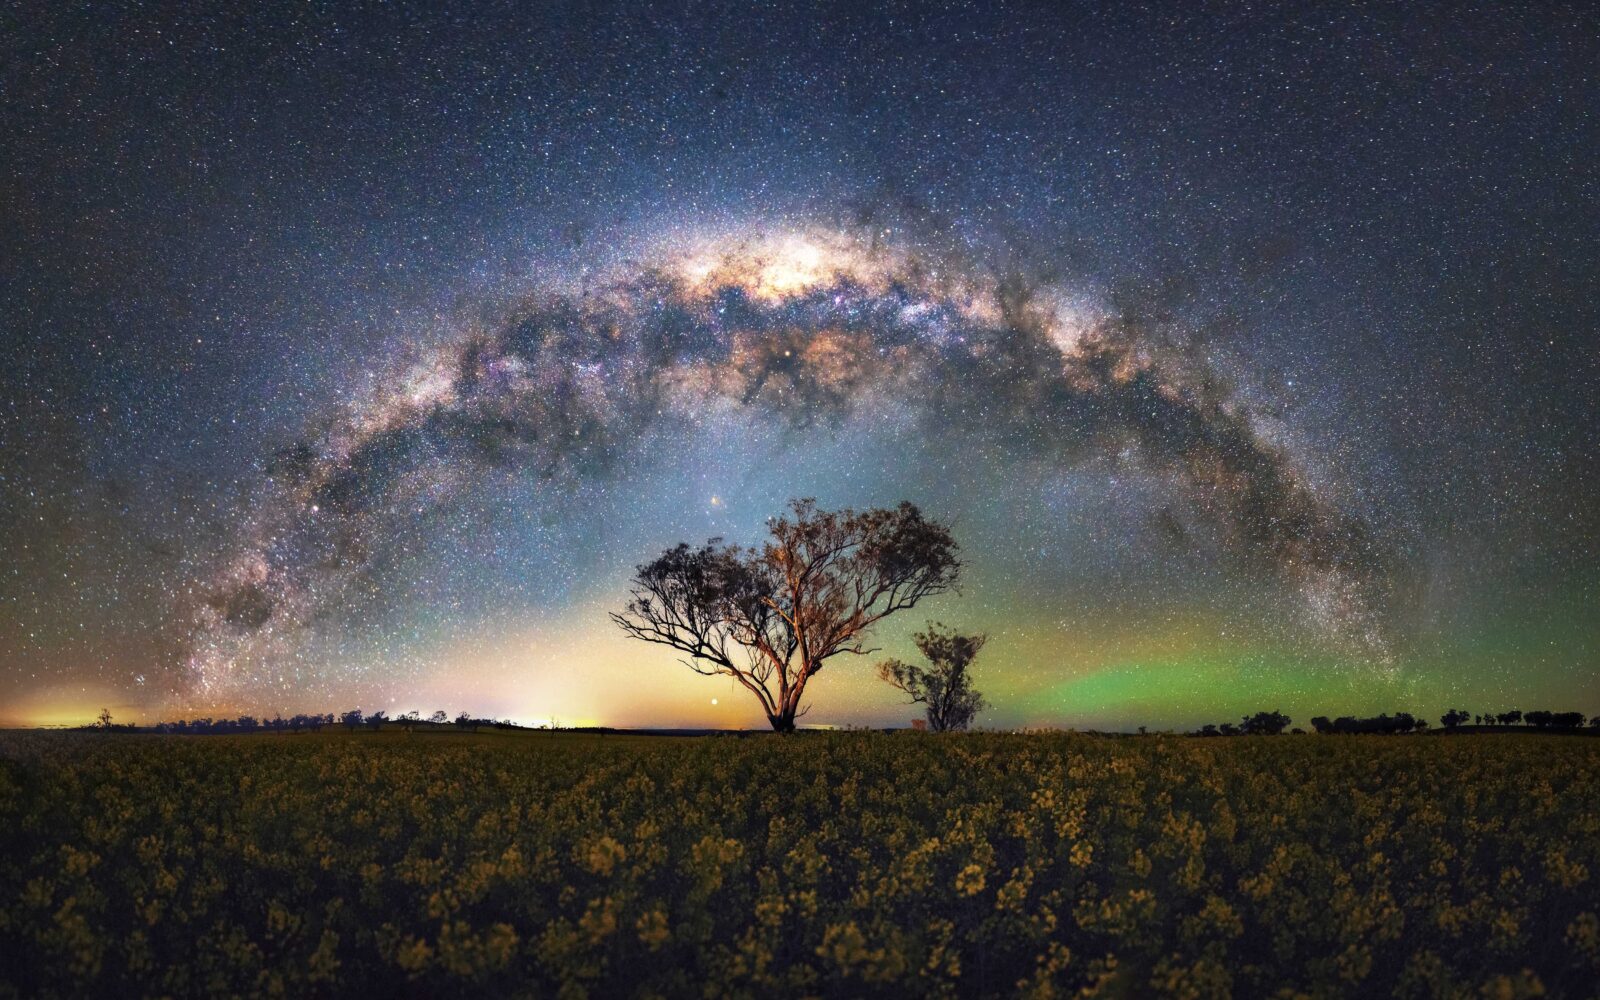 Cairns Milky Way Masterclass - how to photograph the Milky Way